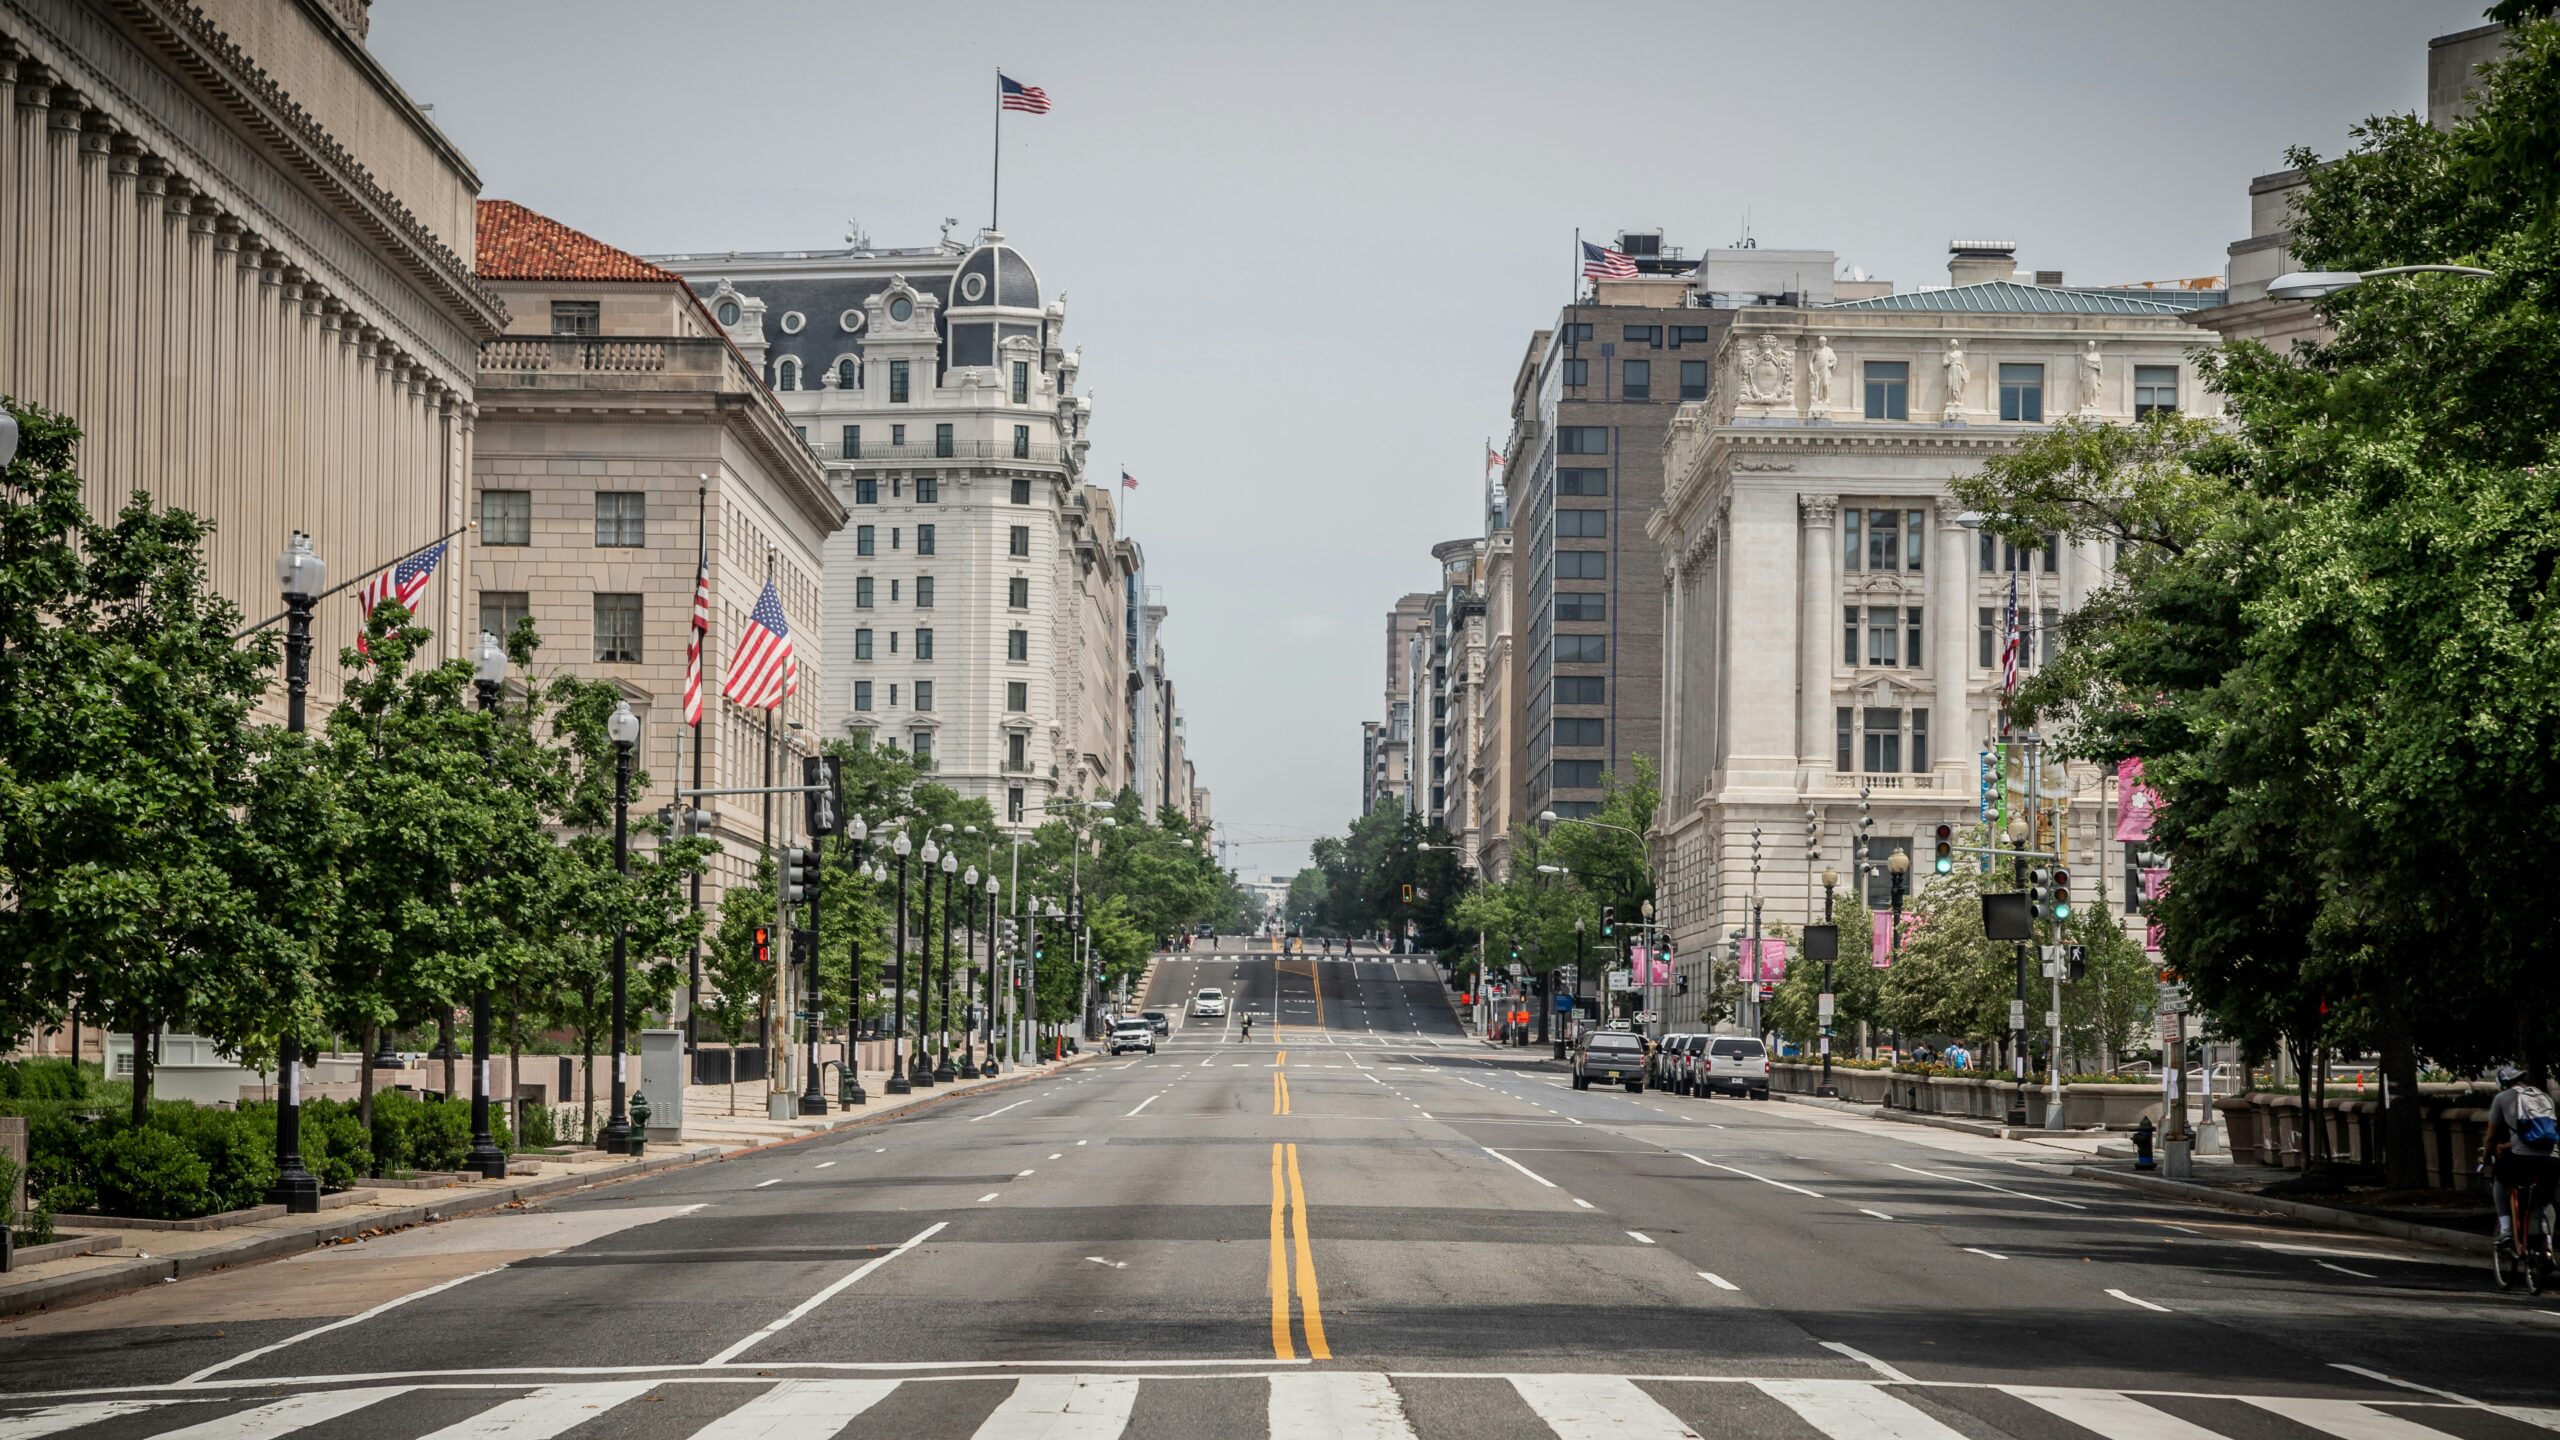 Lean more about the safety level of Washington D.C. and what things travelers should worry about. 
pictured: the streets of Washington D.C. with American flags and greenery around